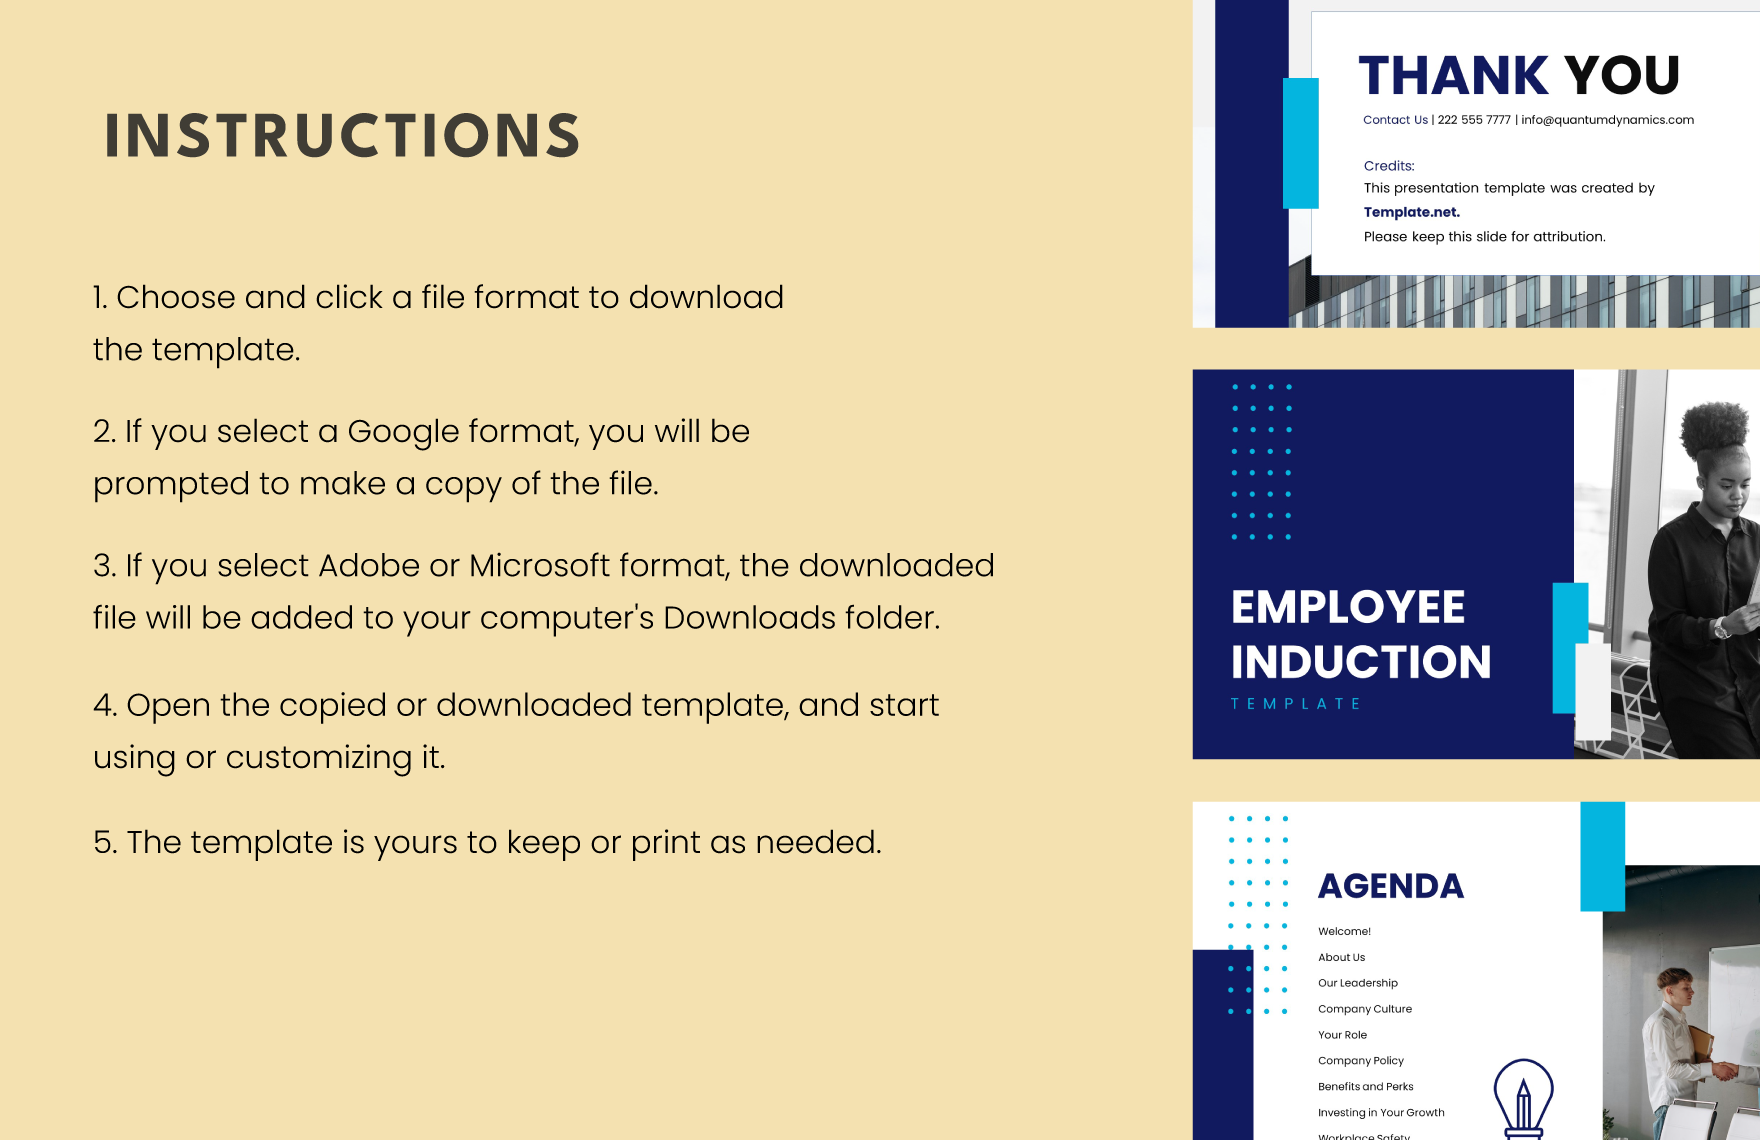 Employee Induction Template